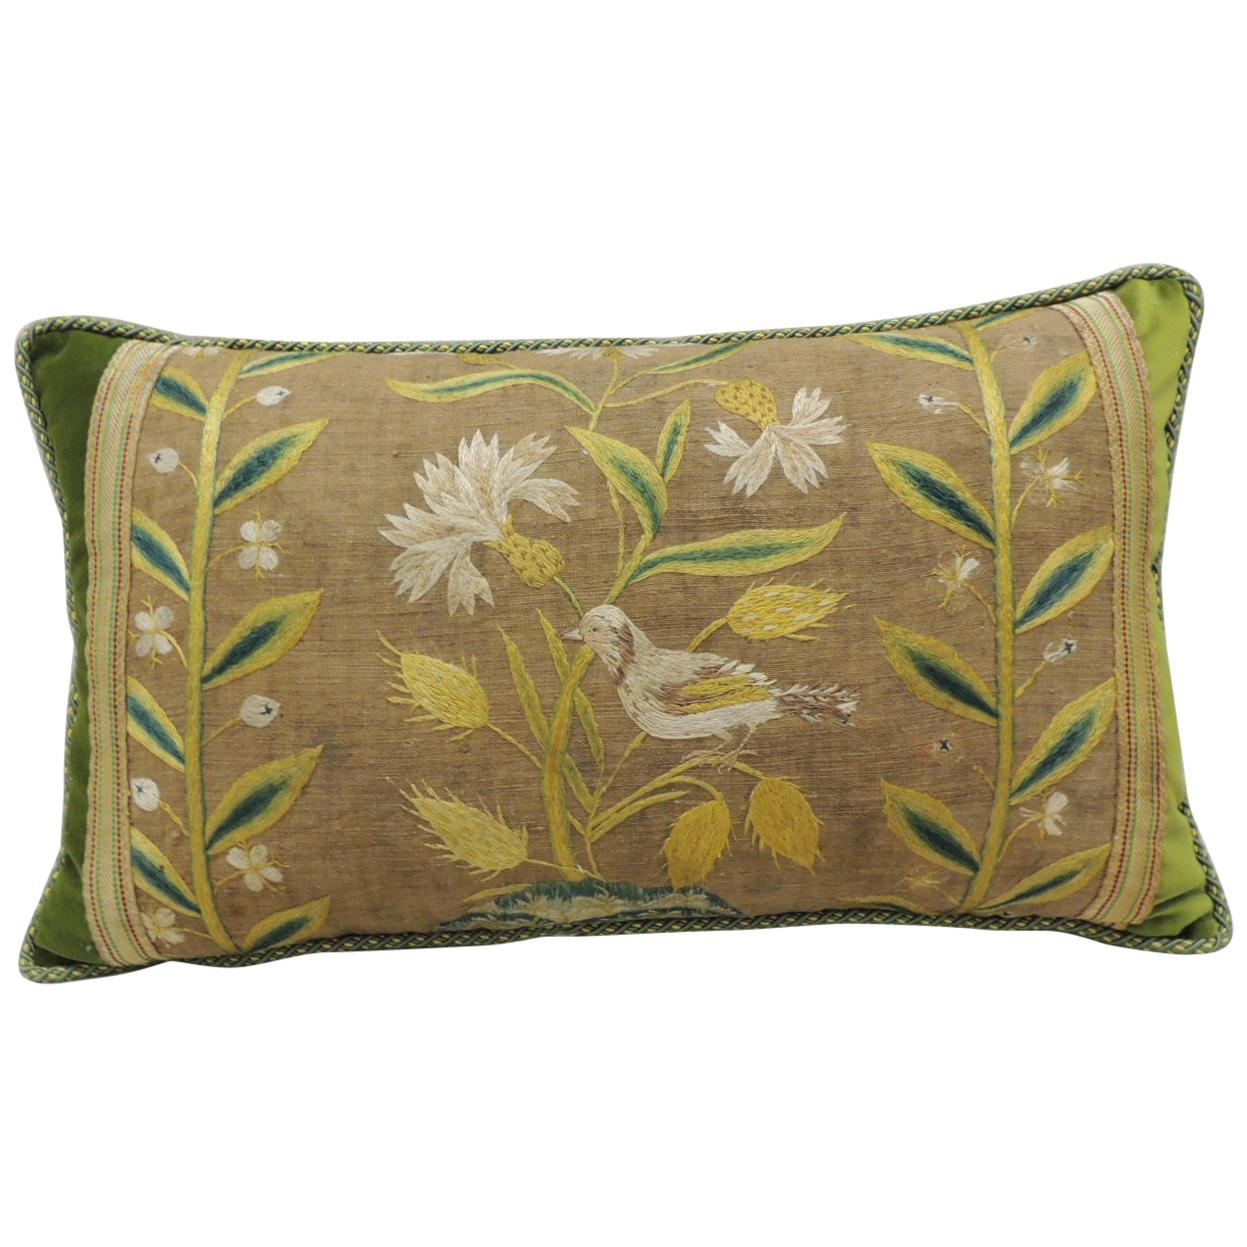 Antique Venetian Yellow and Green Floral Embroidered Bolster Decorative Pillow